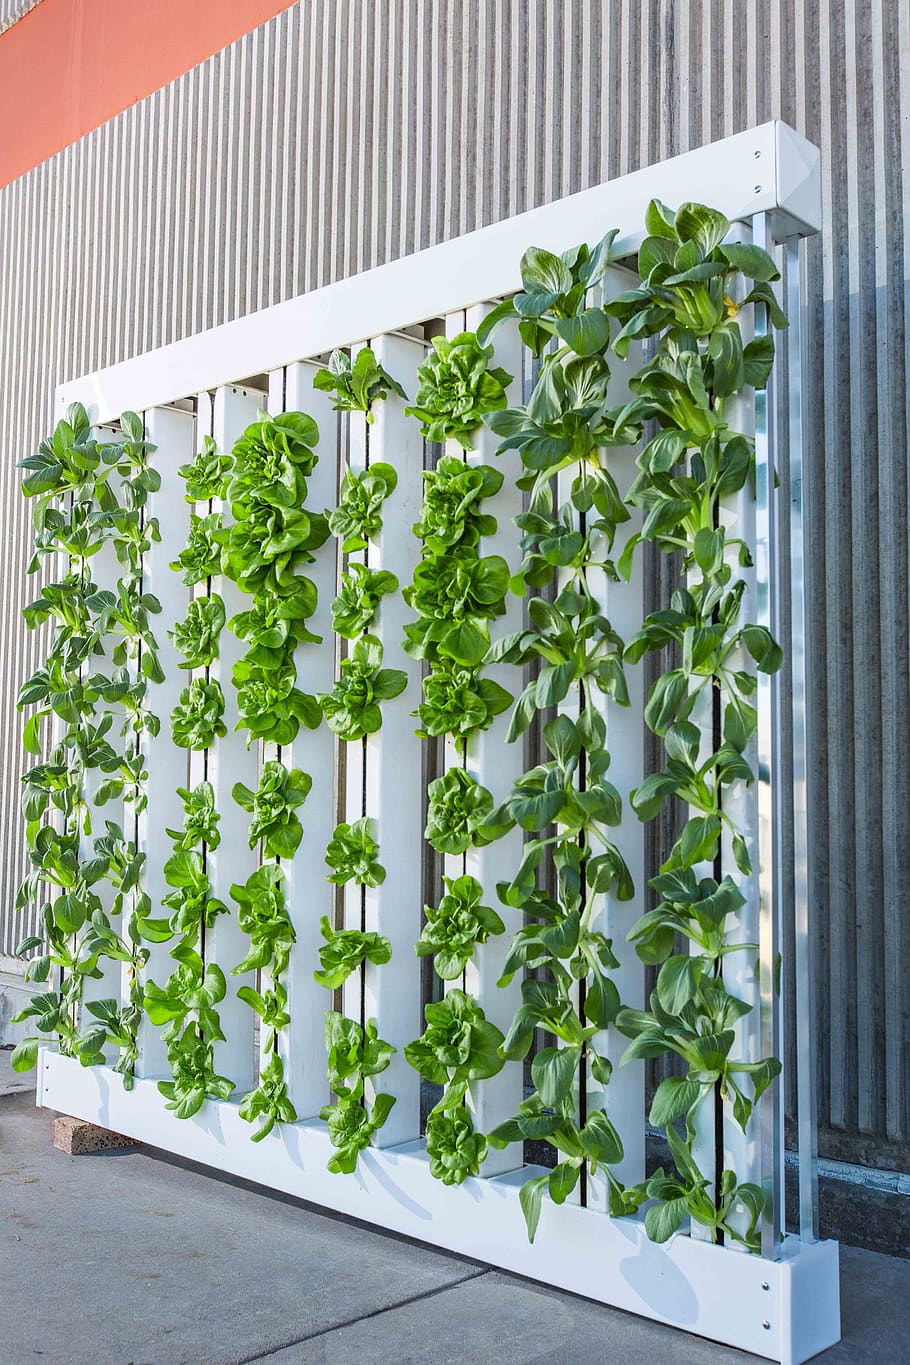 vertical farm, green wall, bok choy, lettuce, hydroponics, plant, growth, green color, nature, day